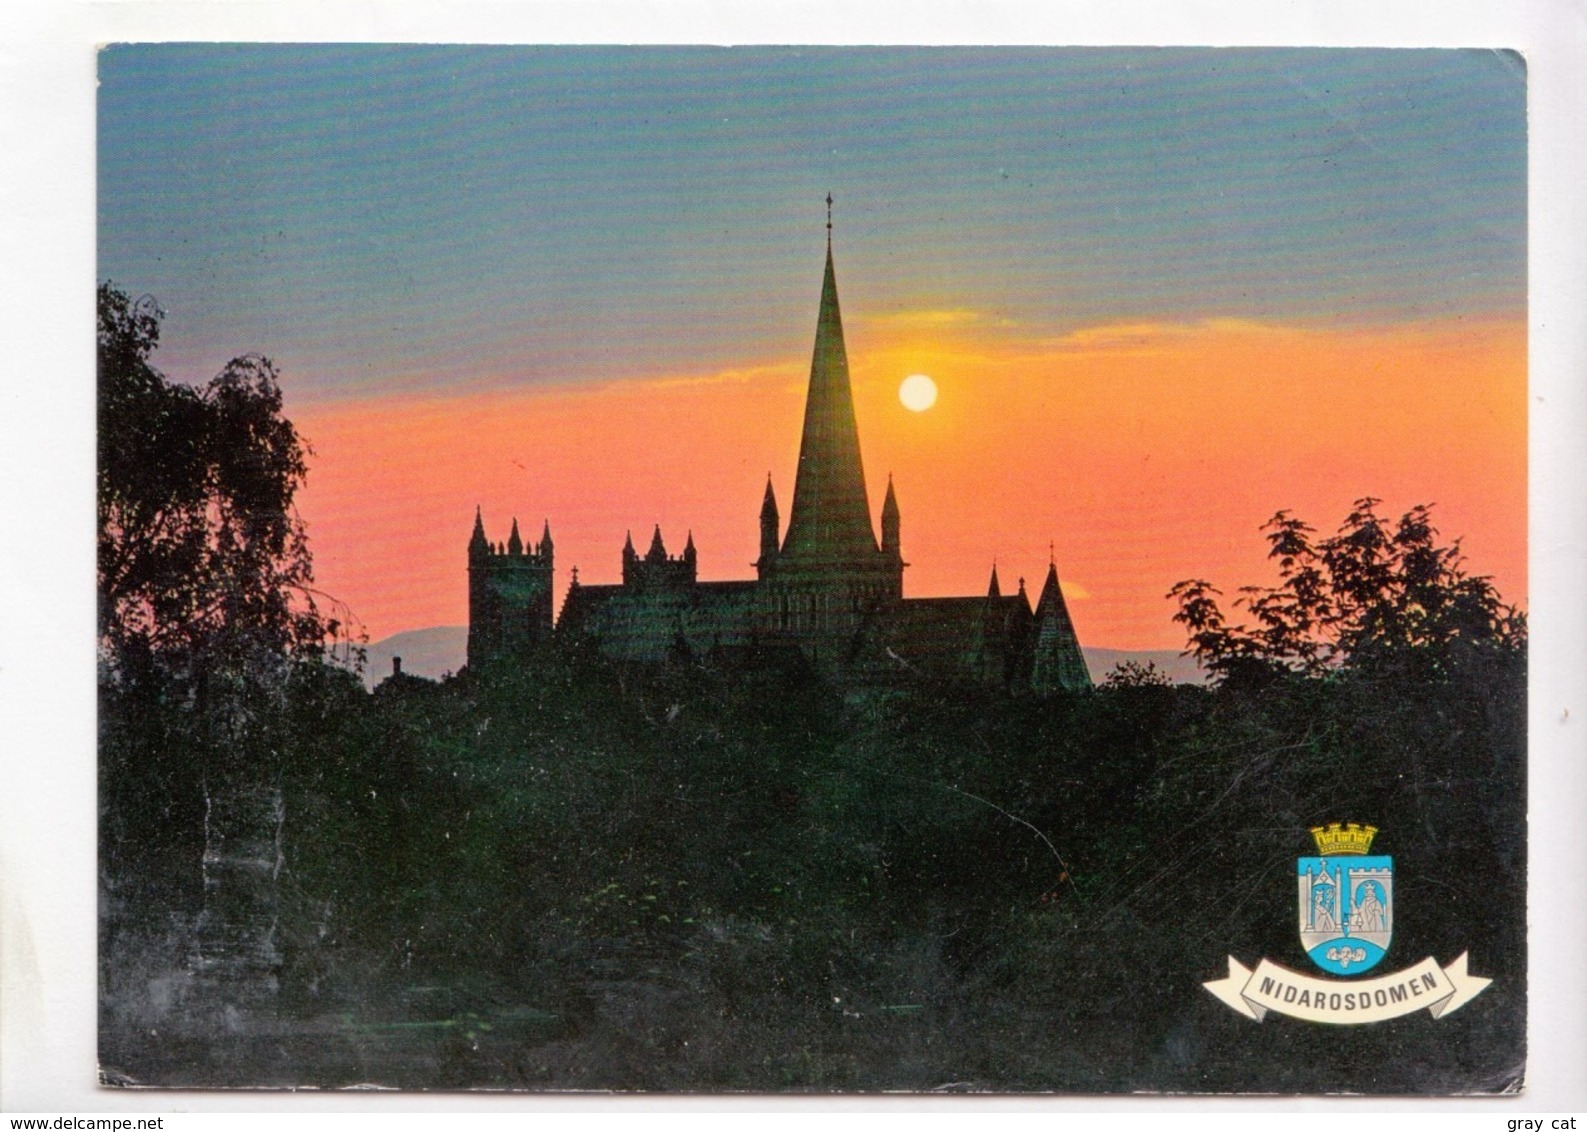 Norway, Trondheim, Summer Eve With The Cathedral In Silhouette, 1970 Used Postcard [23551] - Norway